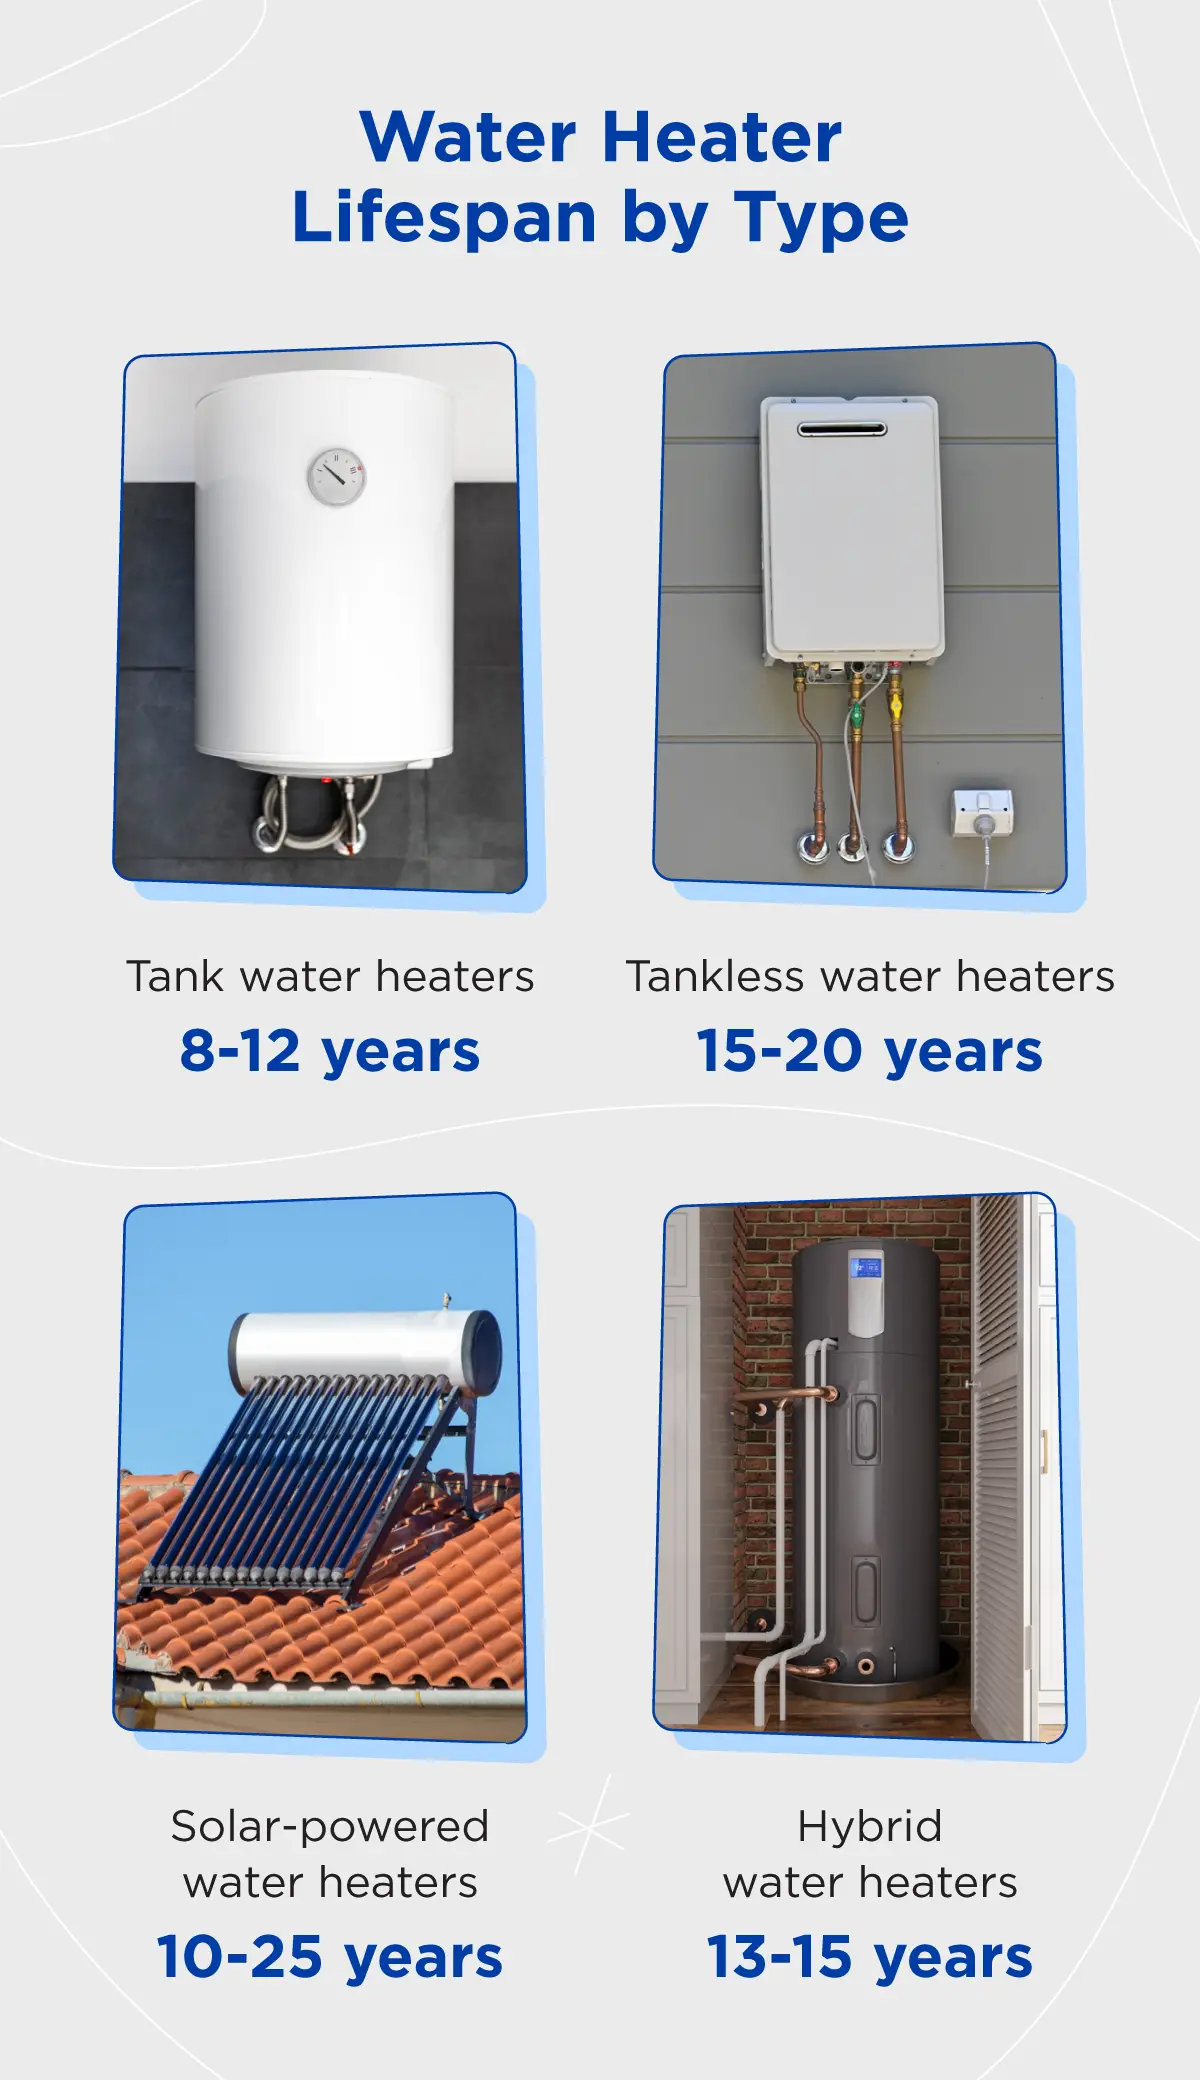 The average lifespan of water heaters by type.